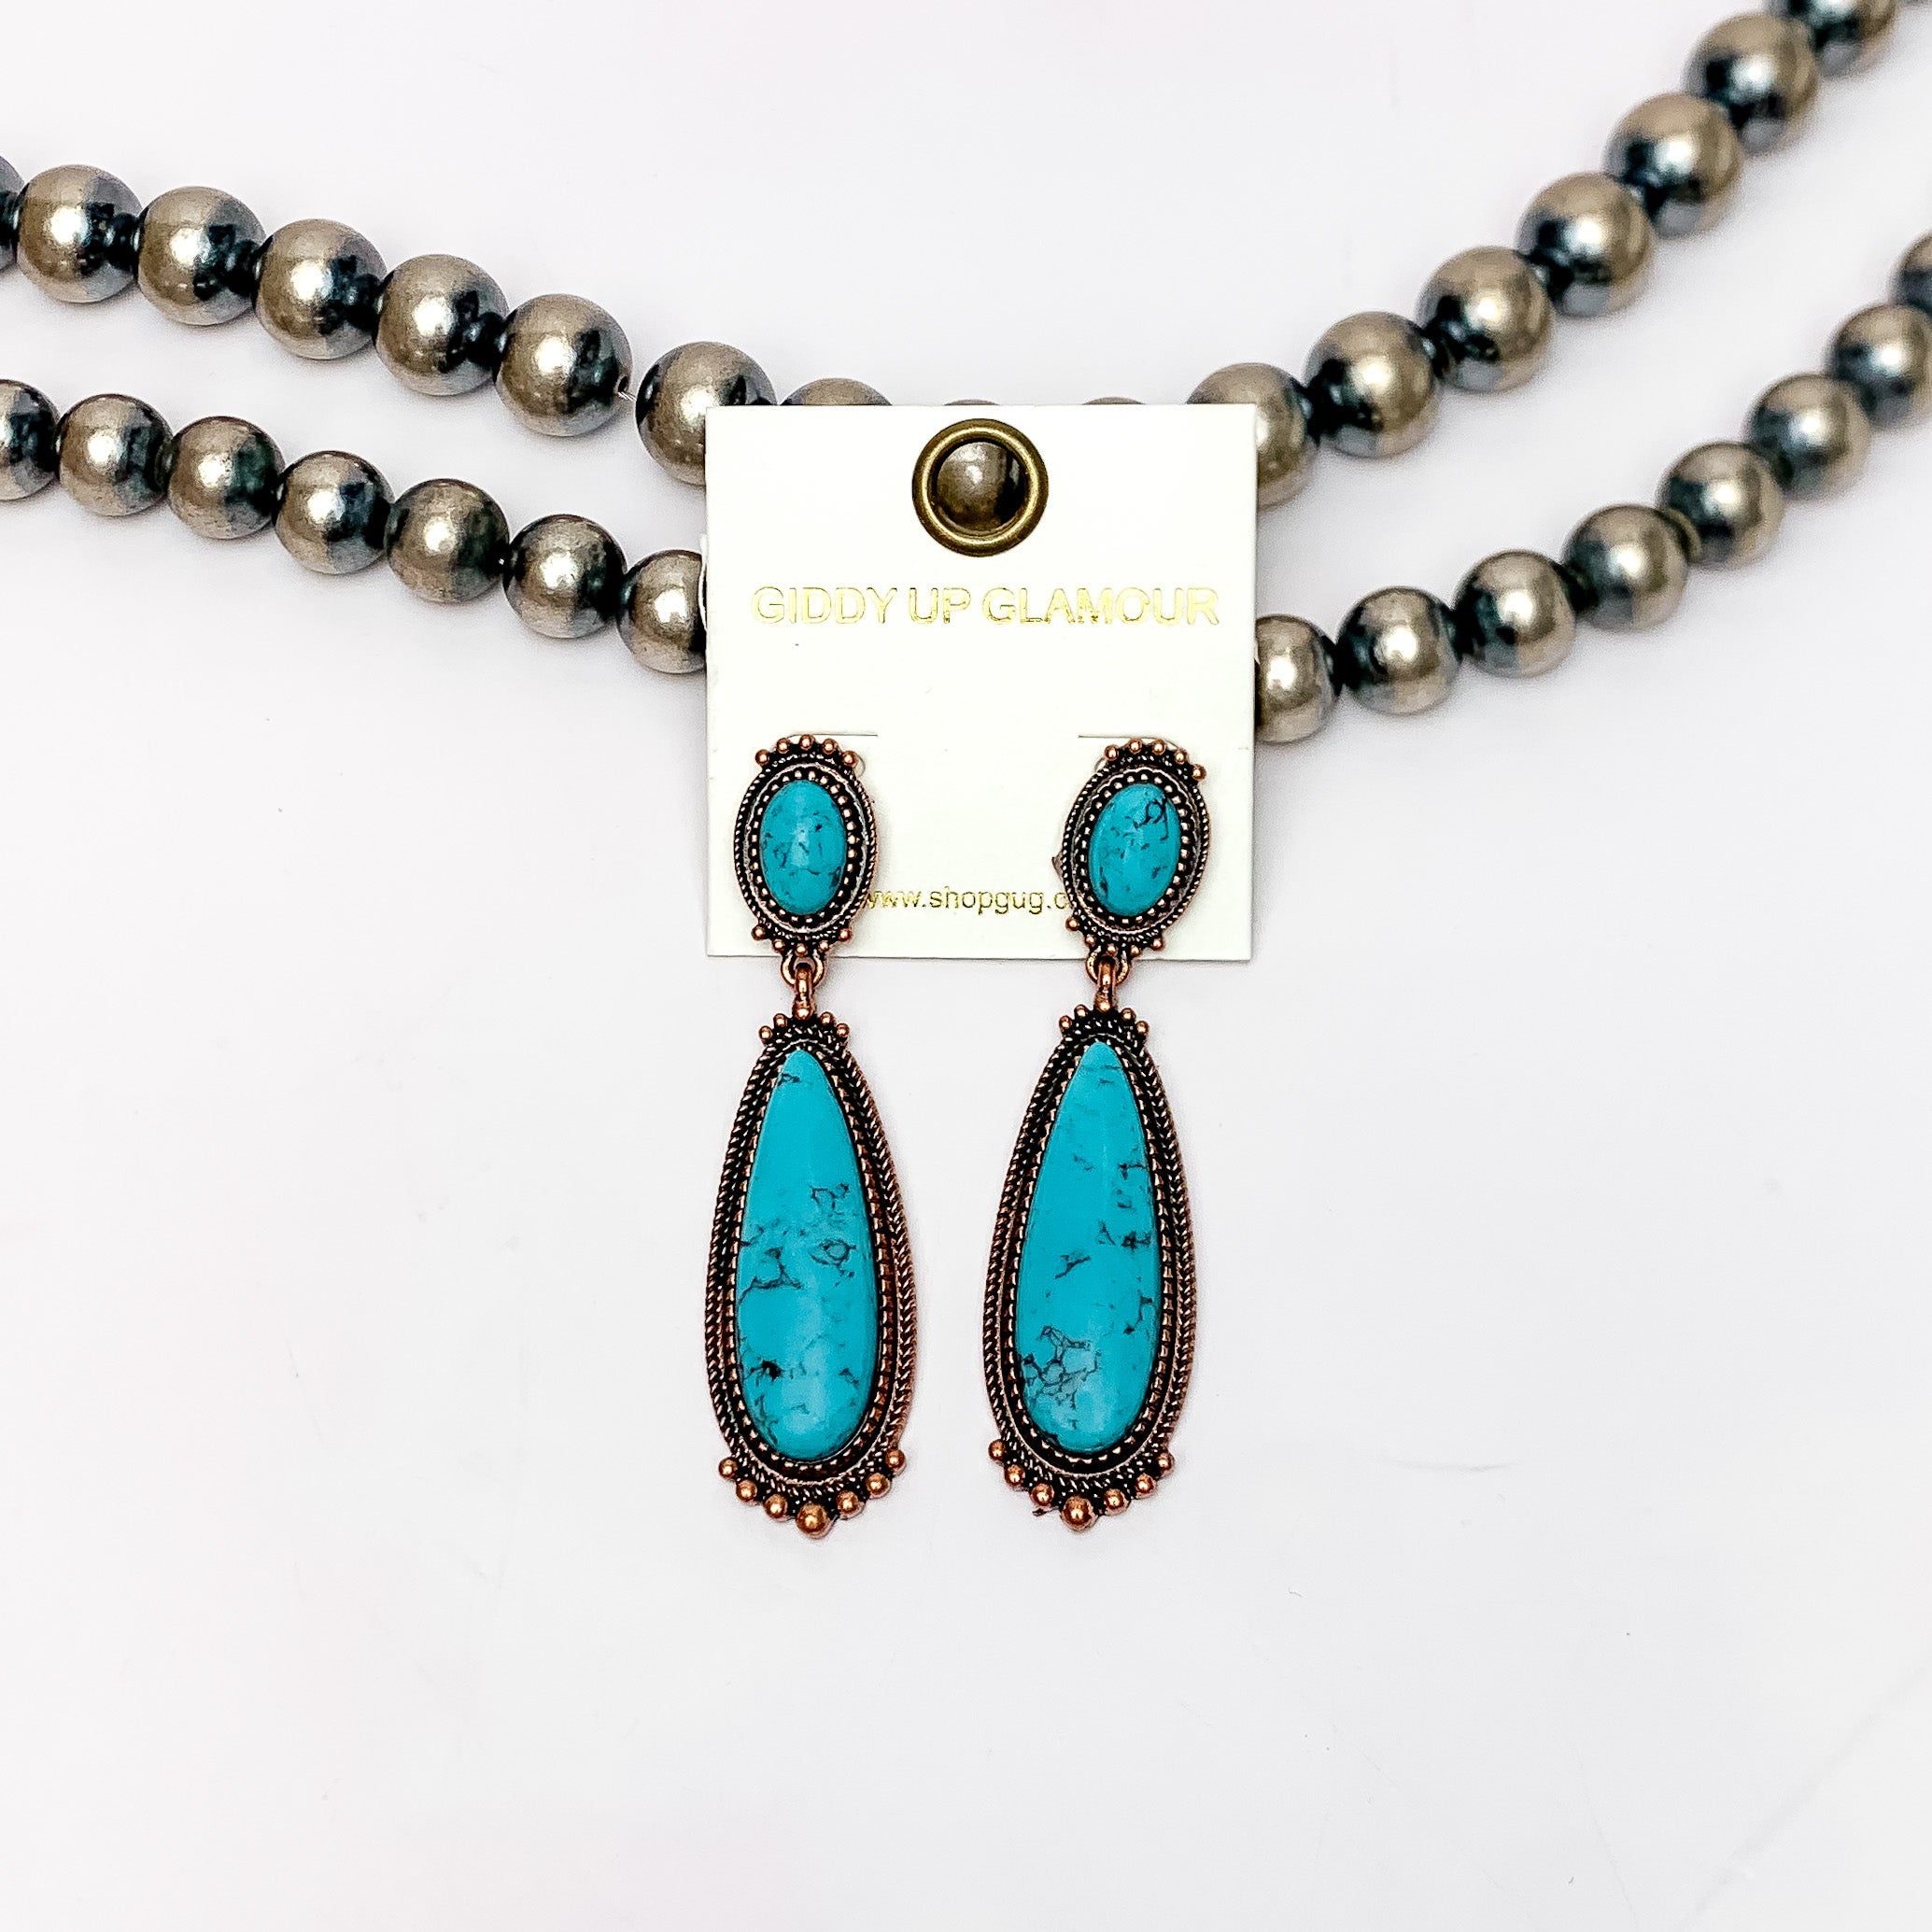 Southern Saturdays Copper Tone Drop Earrings in Turquoise Blue. These earrings featured two large stones. The background of the picture is white and the earrings are laying against Navajo pearls.